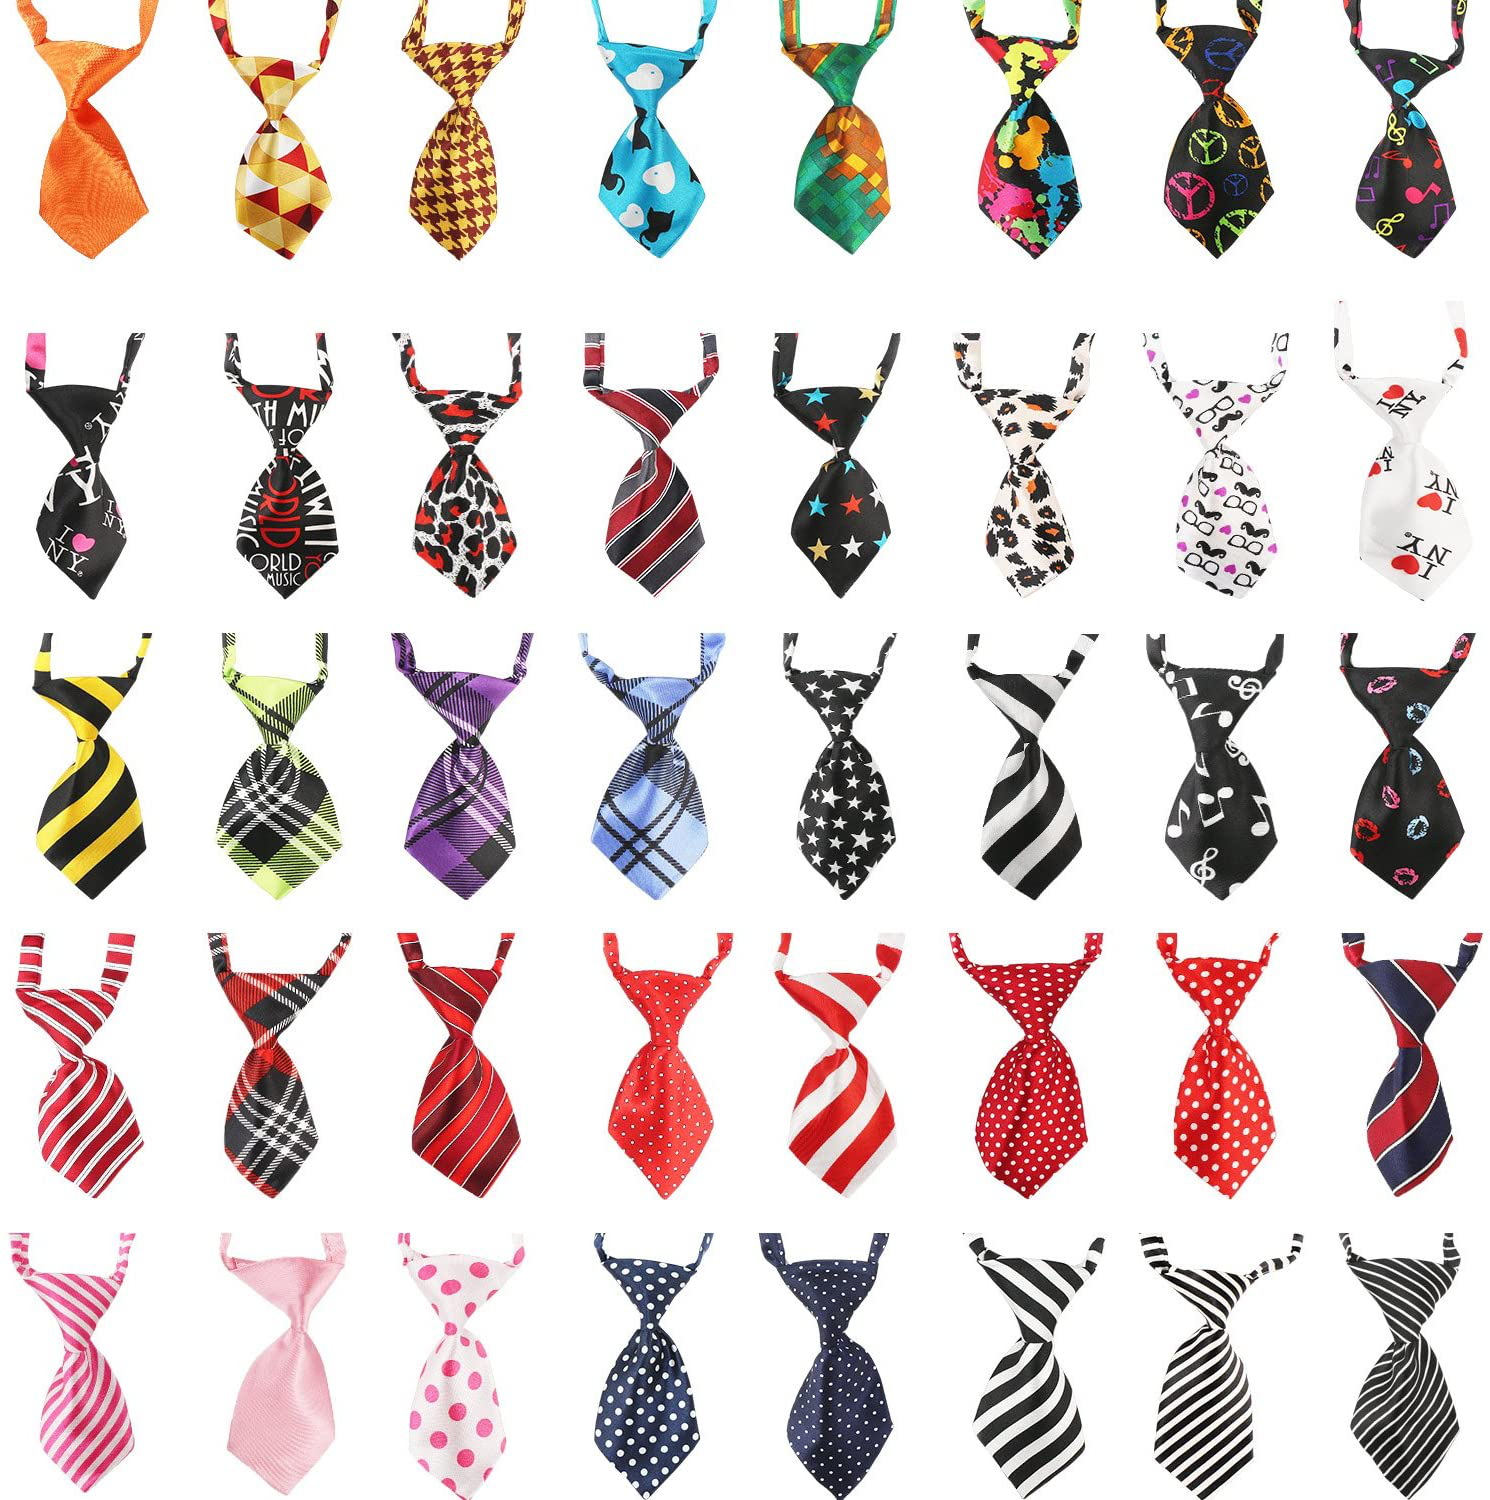 Segarty Neck Ties for Dog, 40 Pack Adjustable Pet Bow Ties Assorted Pattern for Small Dogs Cats Bowties Puppy Neckties Grooming Bows Festival Photography Holiday Party Valentine Costumes Birthday Gift